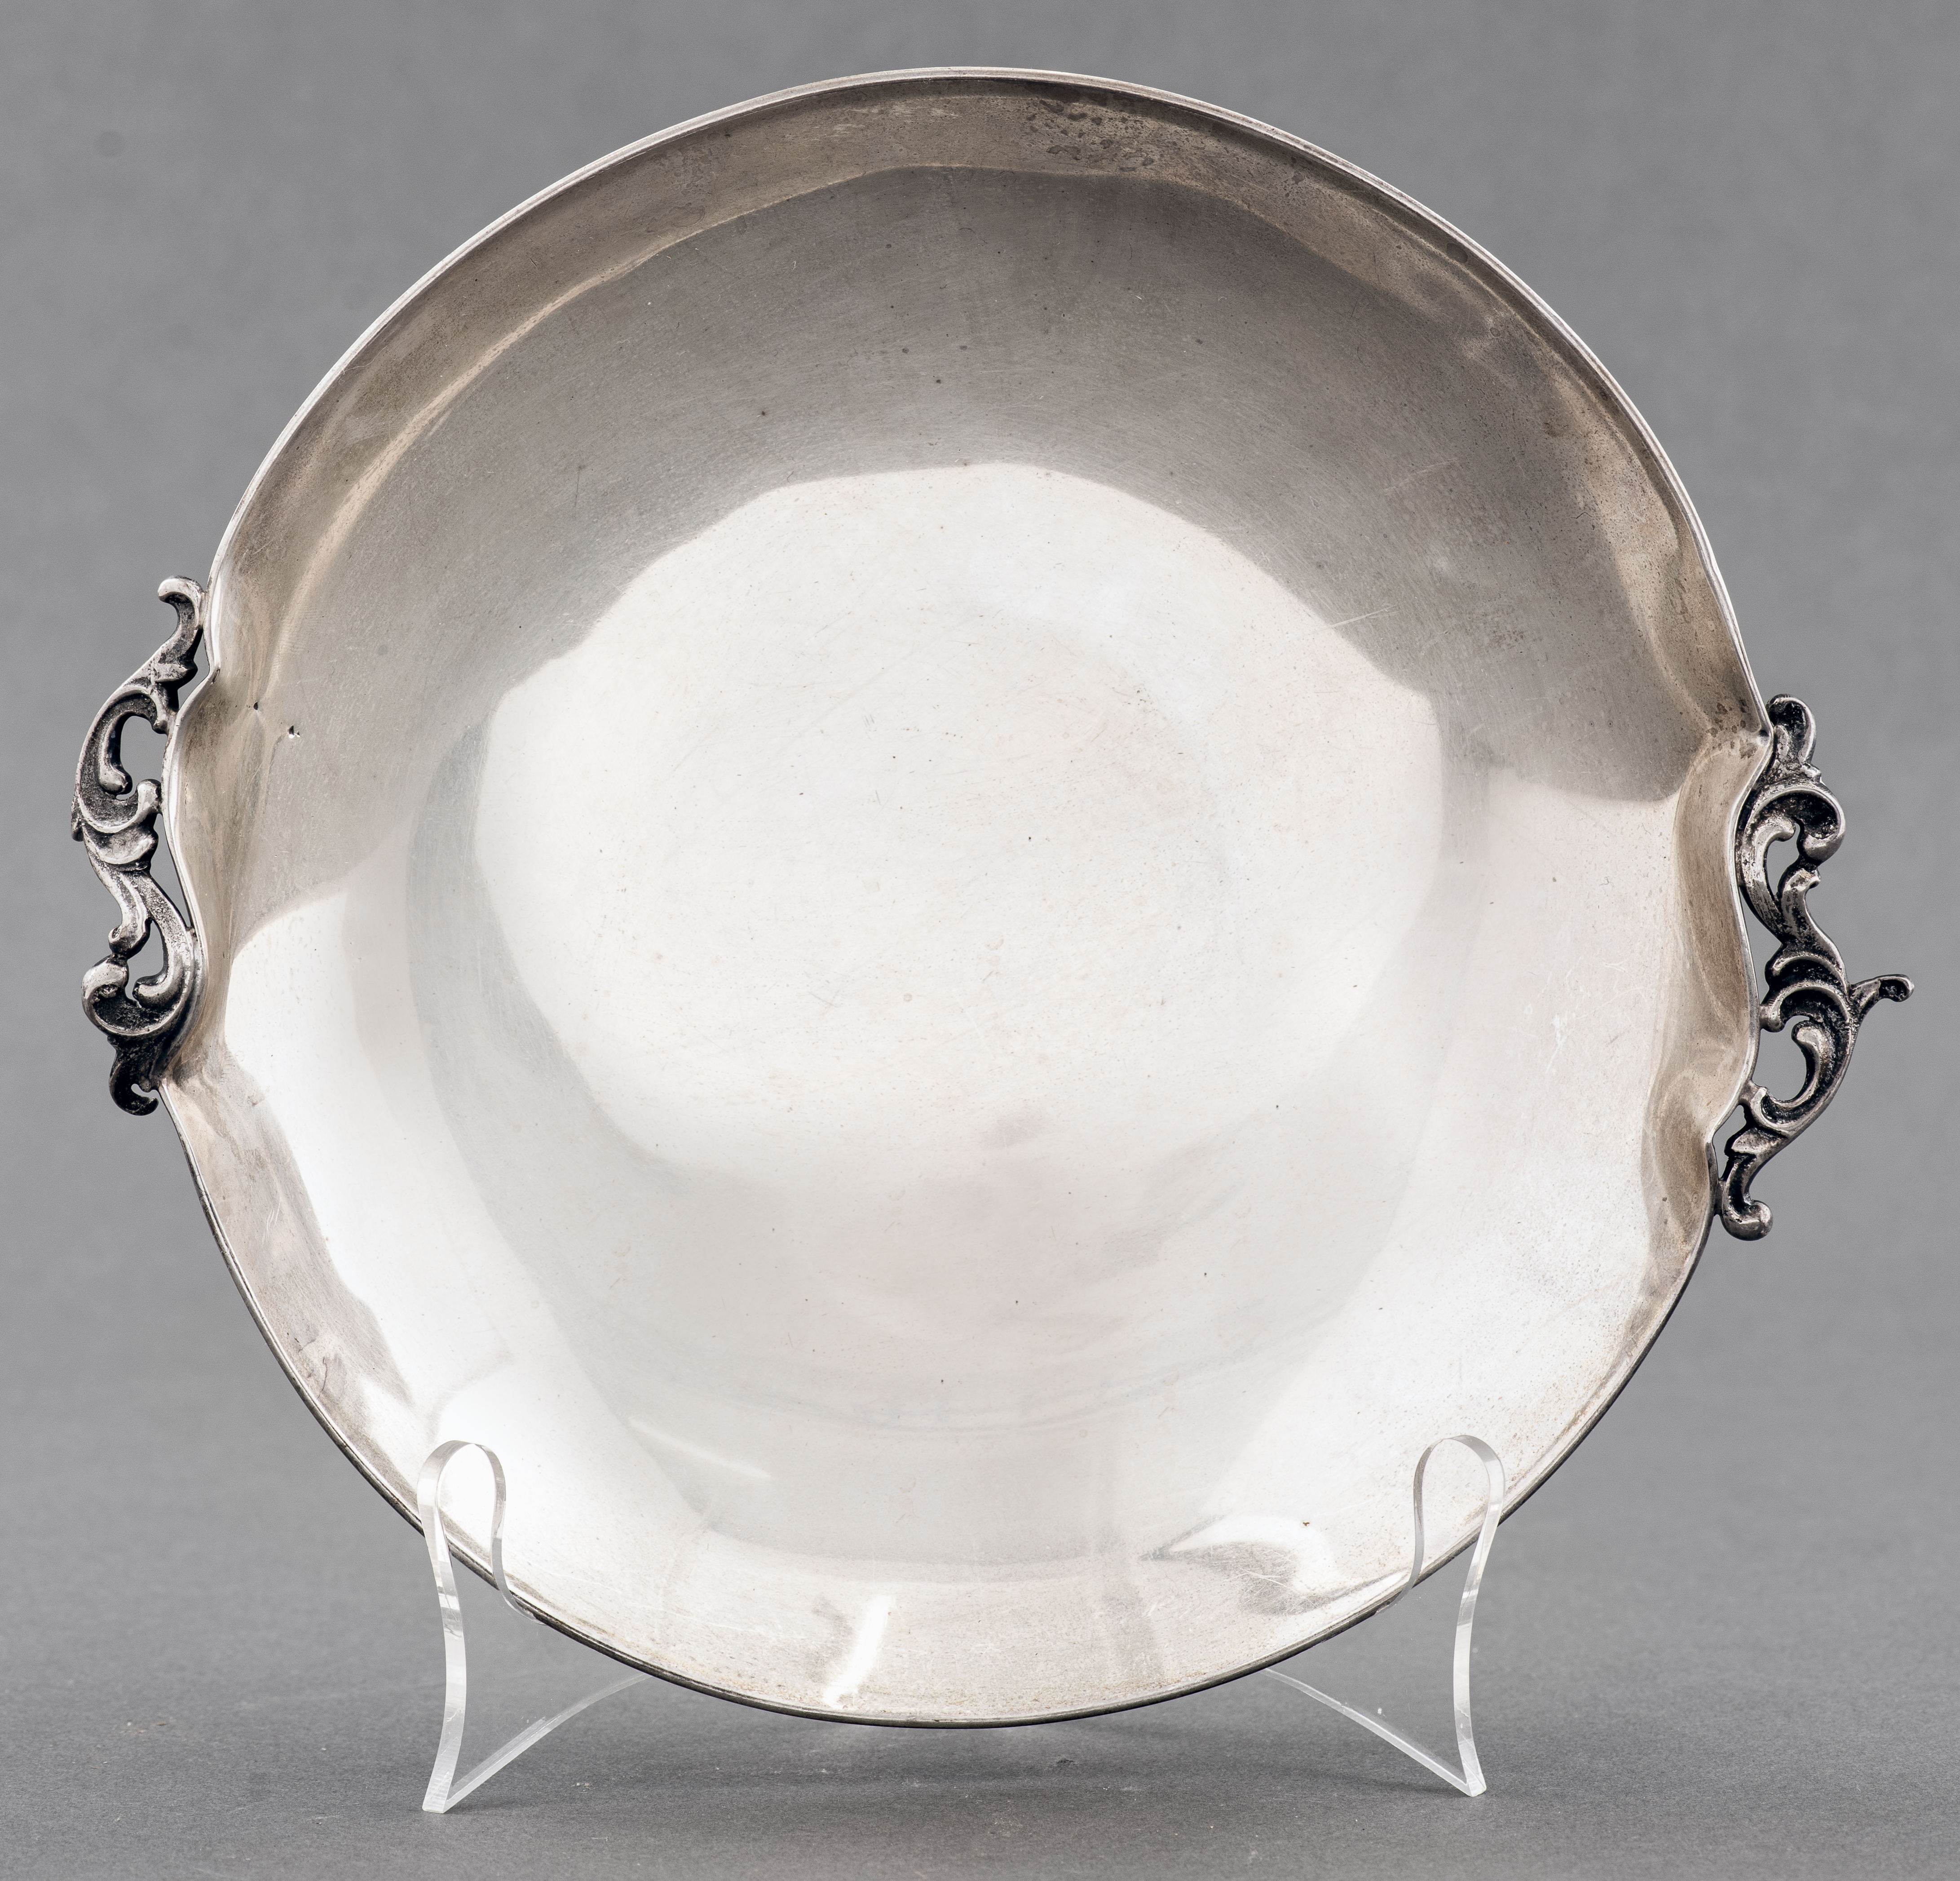 MEXICAN SILVER BOWL WITH SCROLL 3c539e